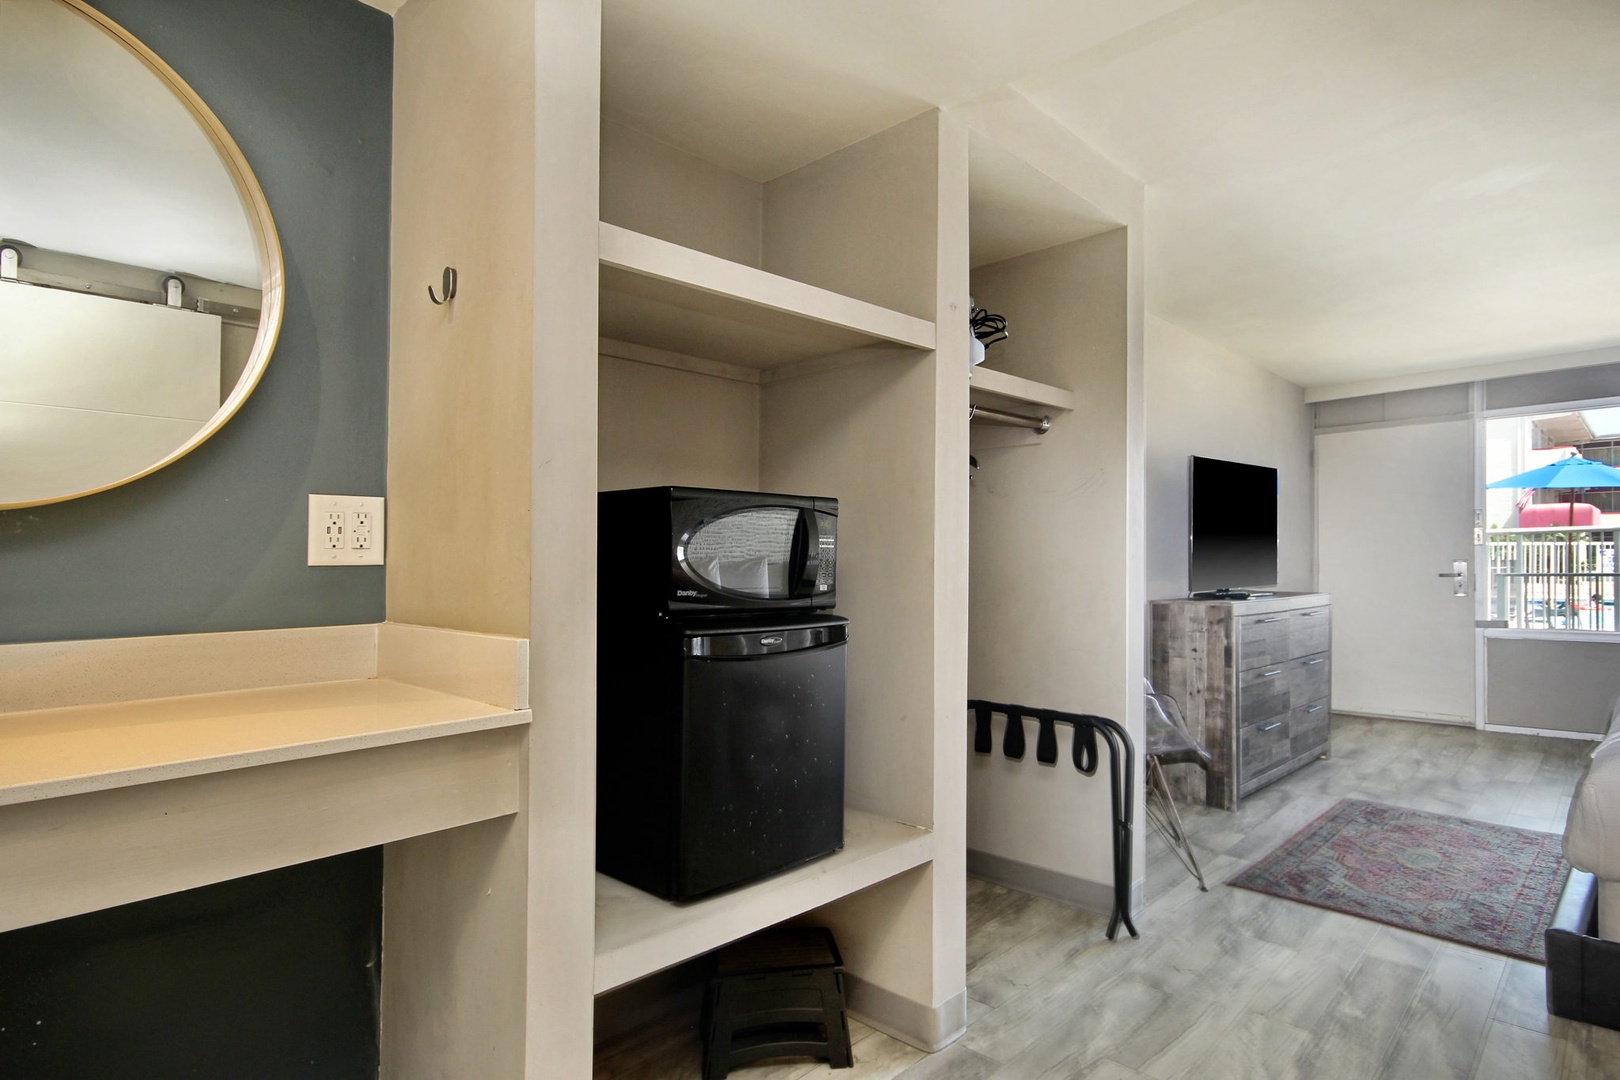 Compact kitchenette, ideal for your stay